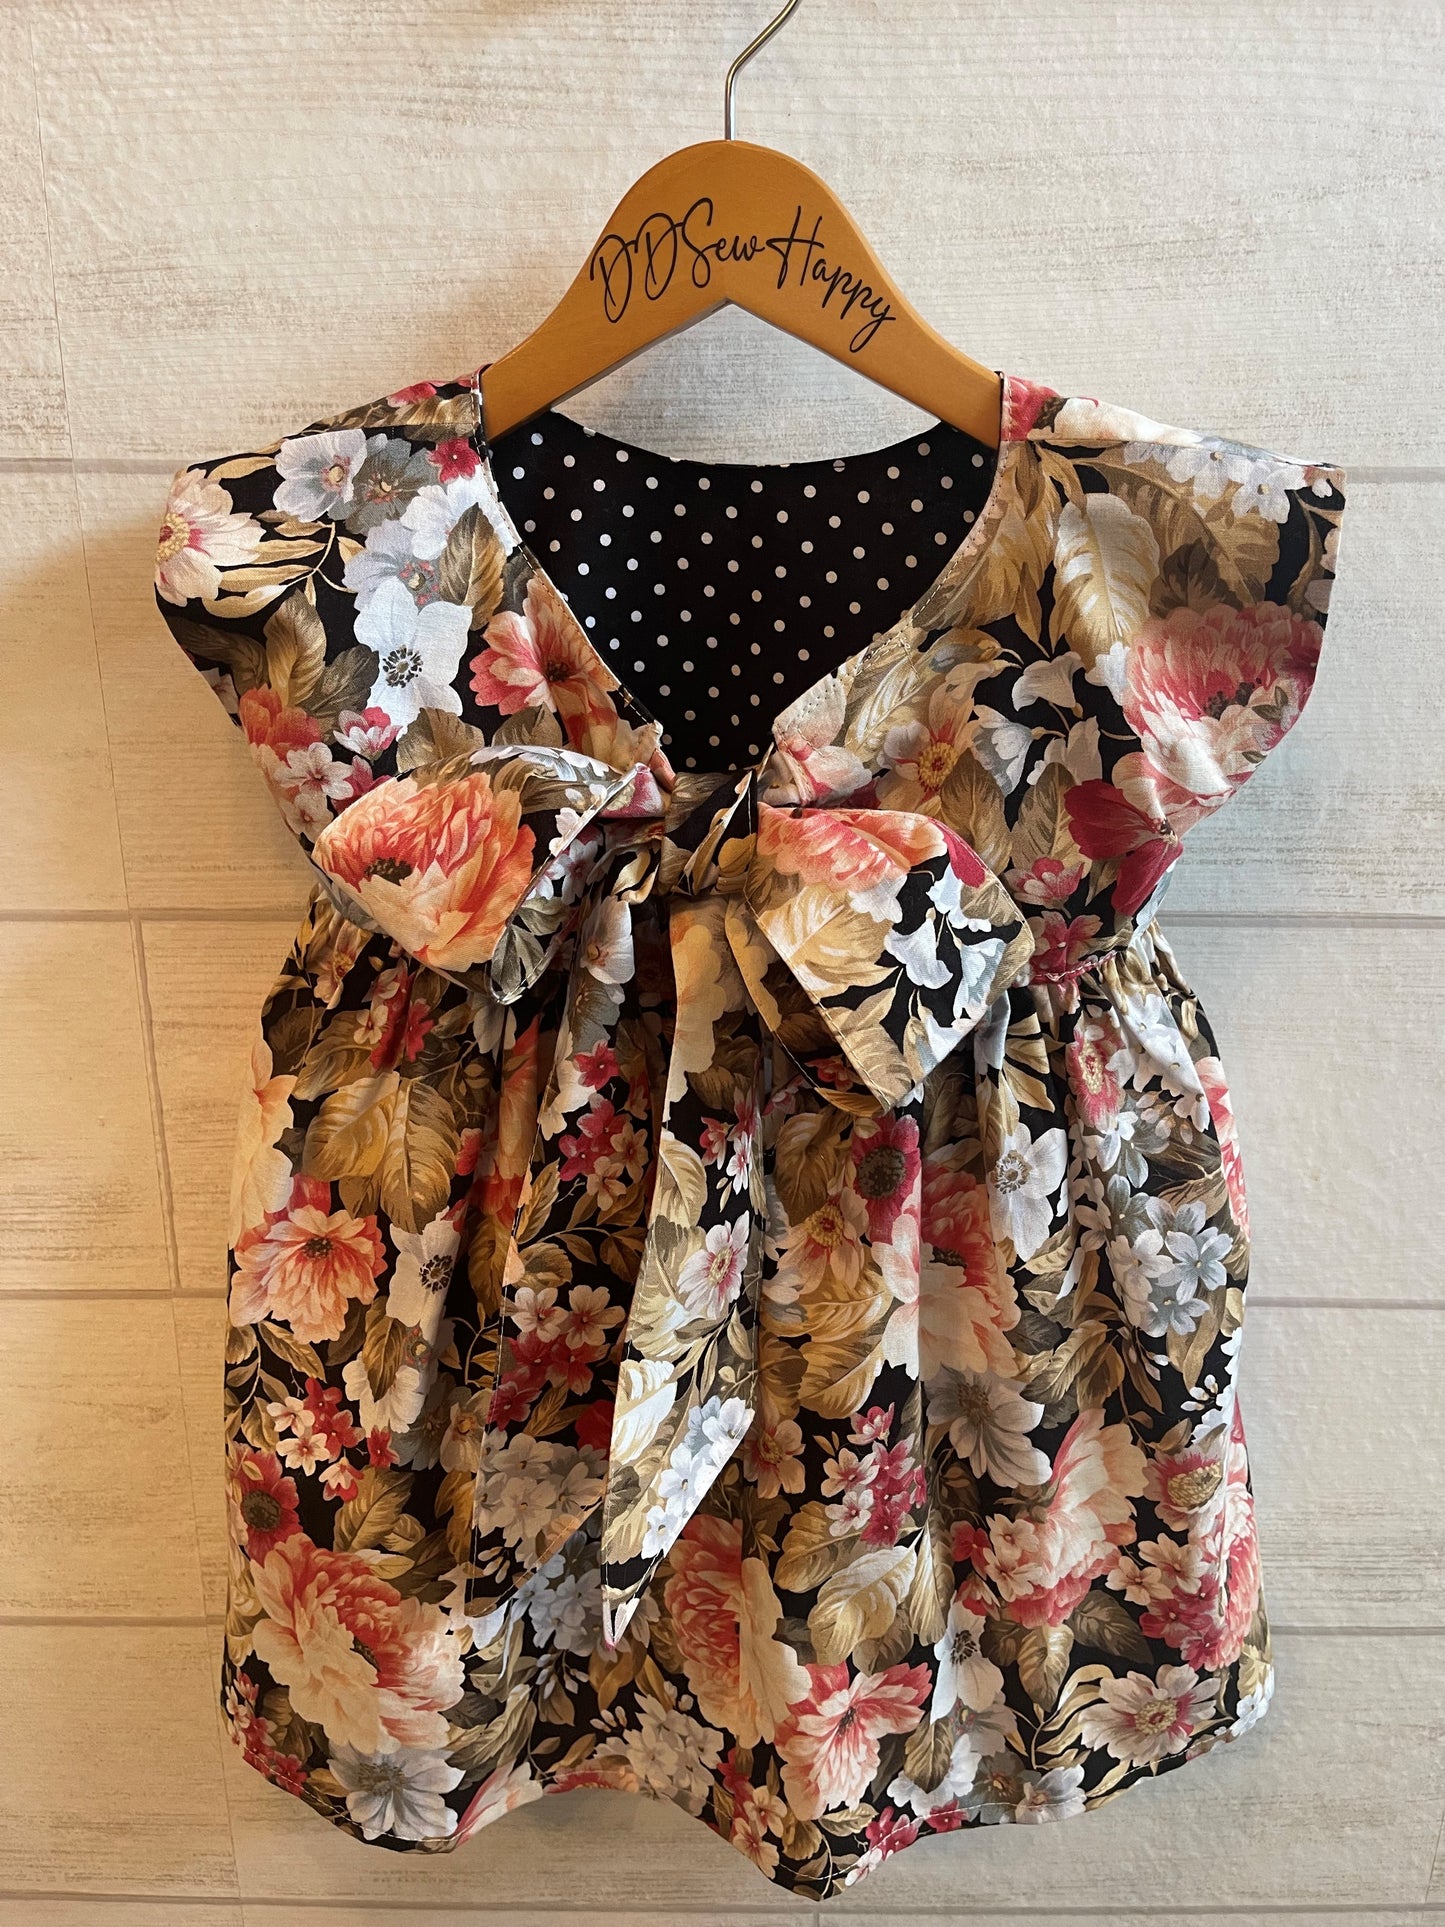 Girls Toddler Pinafore Boho Style Floral Dress with tie back bow